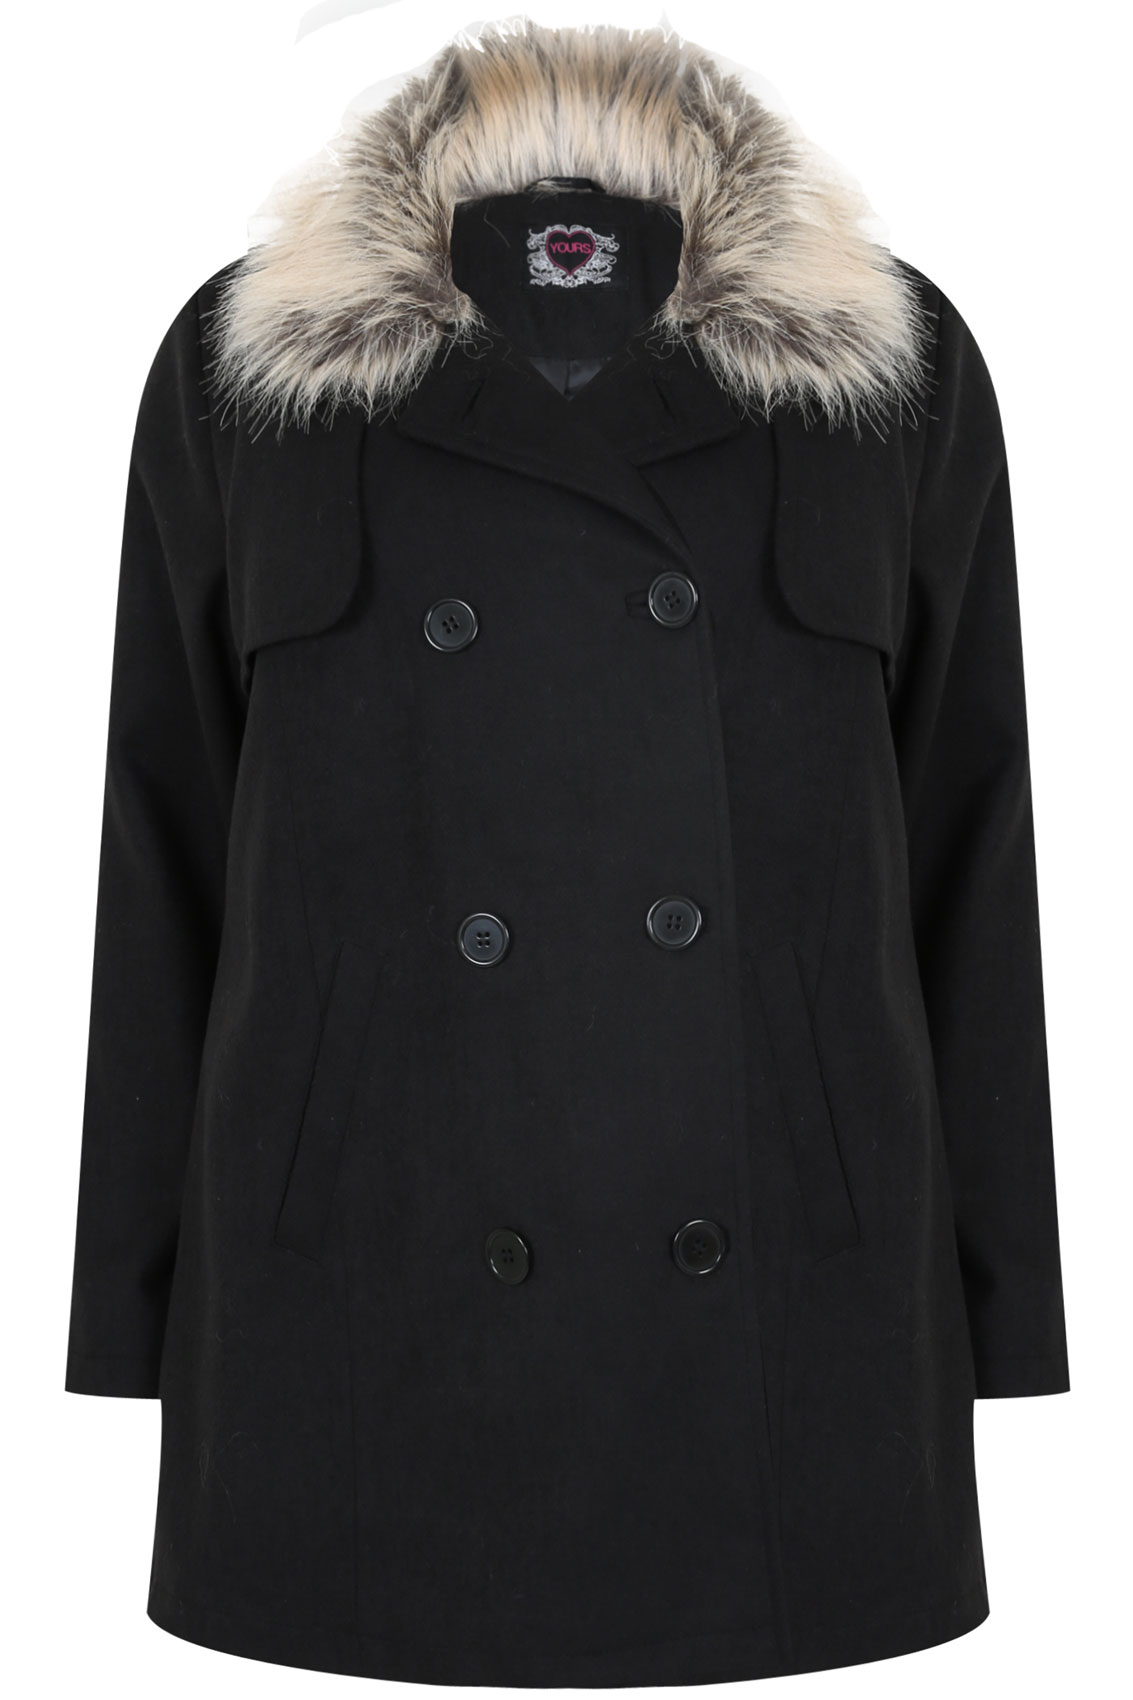 Black Double Breasted Pea Coat With Fur Collar Plus Size 16 to 32